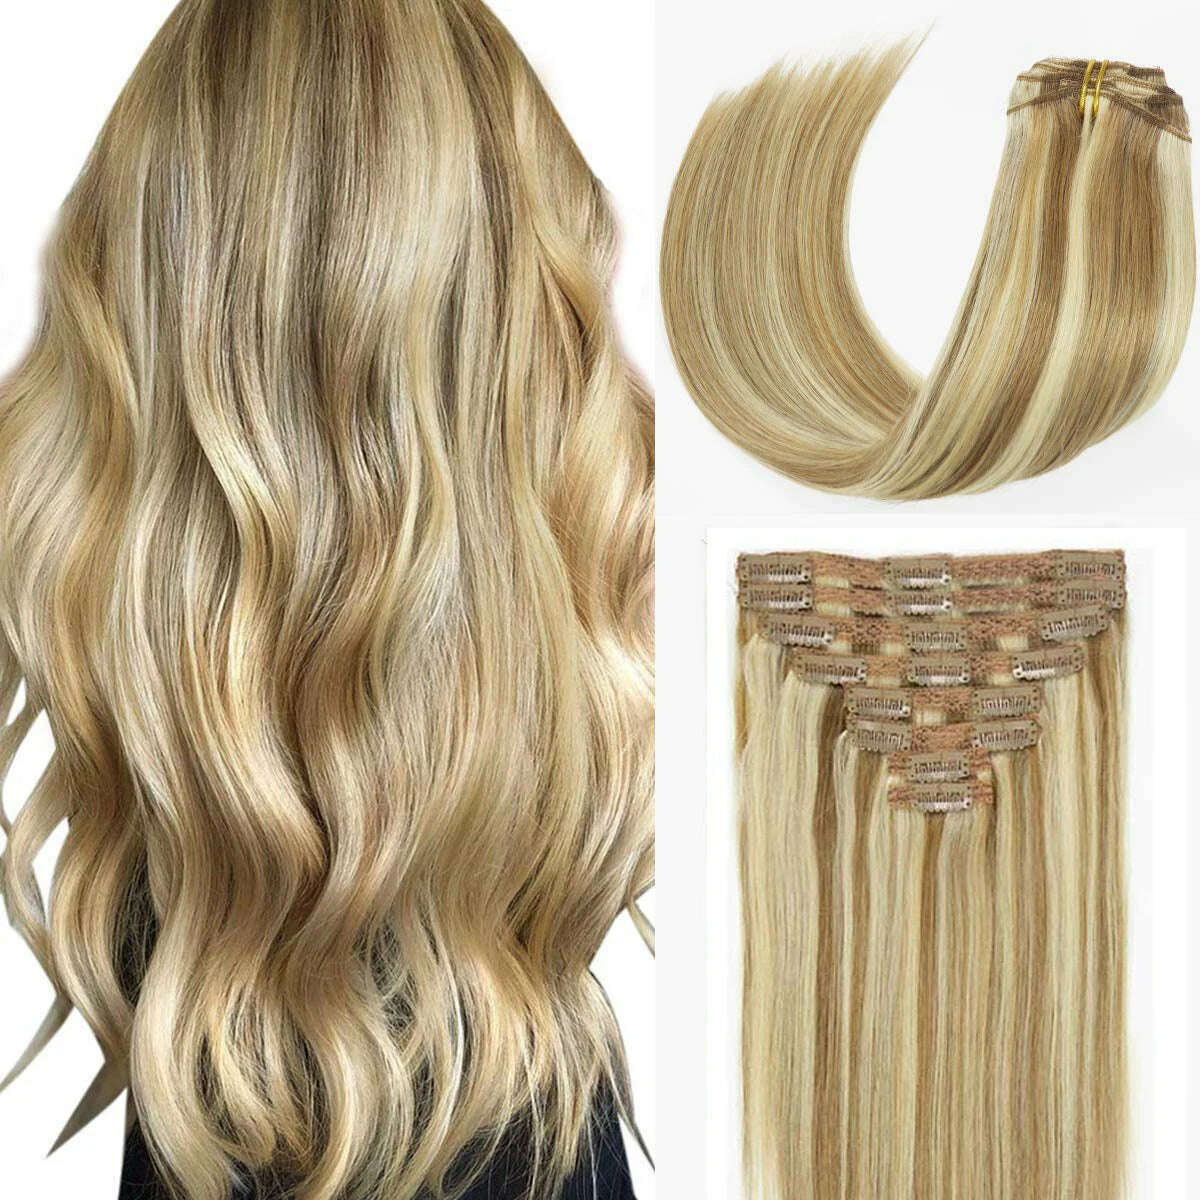 KIMLUD, 120G Clip In Hair Extension Human Hair Color P8/613 Straight Brazilian 100% Human Hair Extension Clip In 8 Pieces/Sets Full Head, P8-613 / 120g/Set / 16inches, KIMLUD Women's Clothes